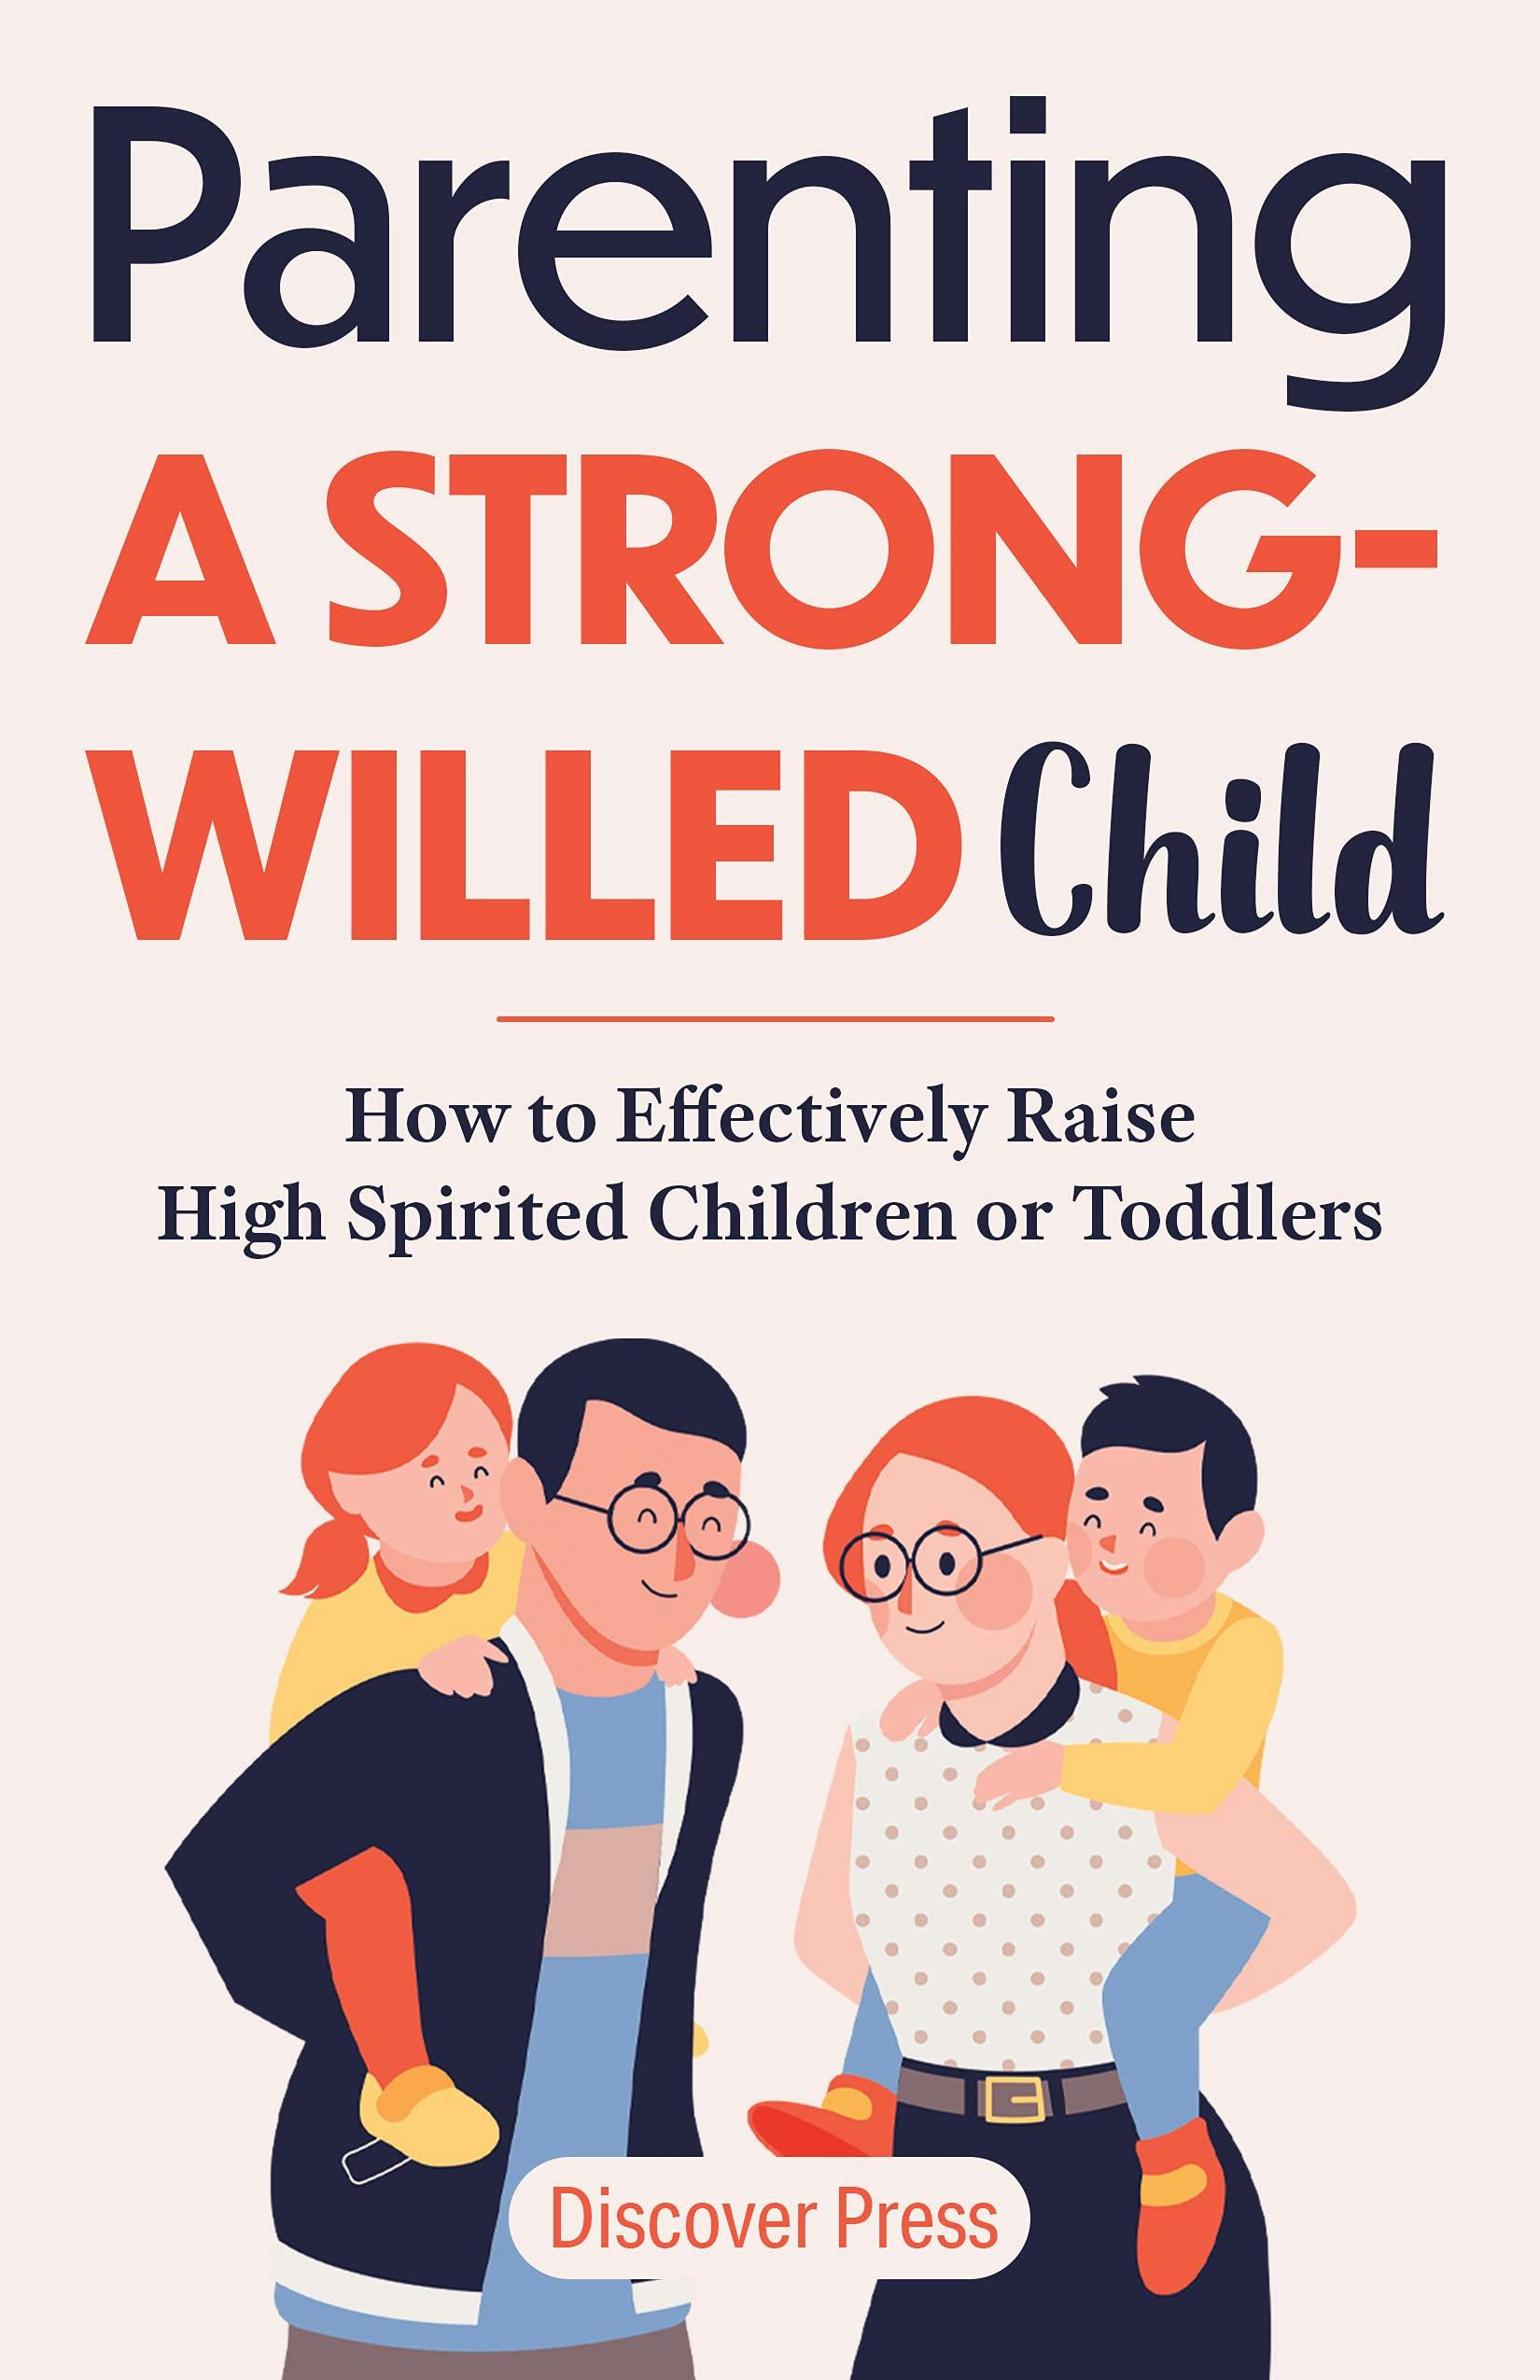 "Parenting a Strong-Willed Child" by "Discover Press"